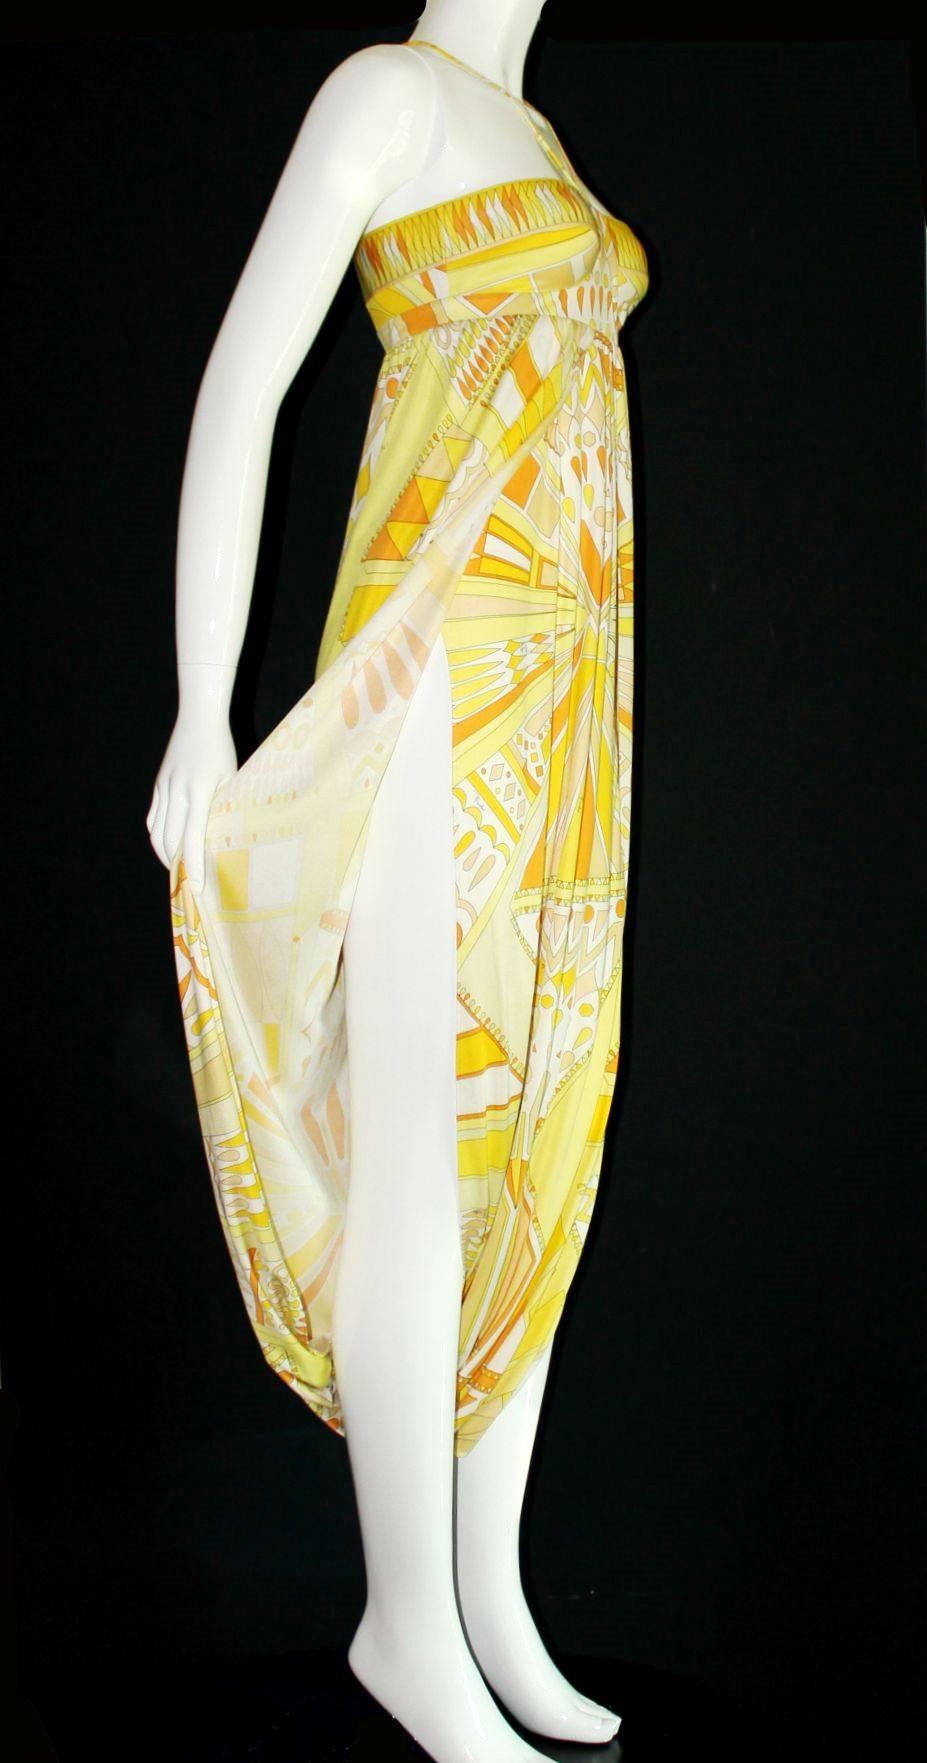 Exclusive and gorgeous EMILIO PUCCI goddess harem jumpsuit gown
Beautiful jersey silk
Sexy high split on sides
Front and back panel connected
Emilio Pucci Signature Print
"Pucci" discreetly written all over
Size IT 40
Retails for 5689$